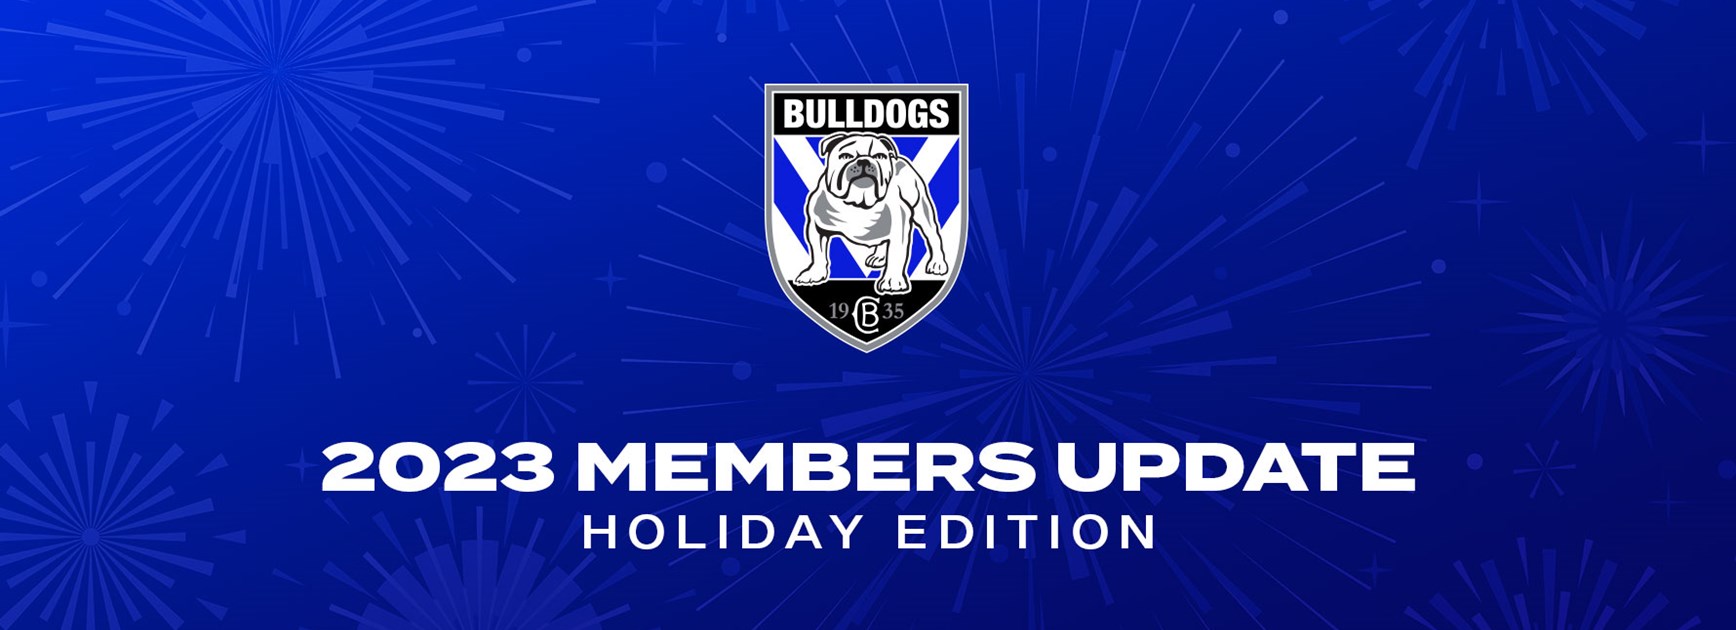 A special holidays message from the Bulldogs